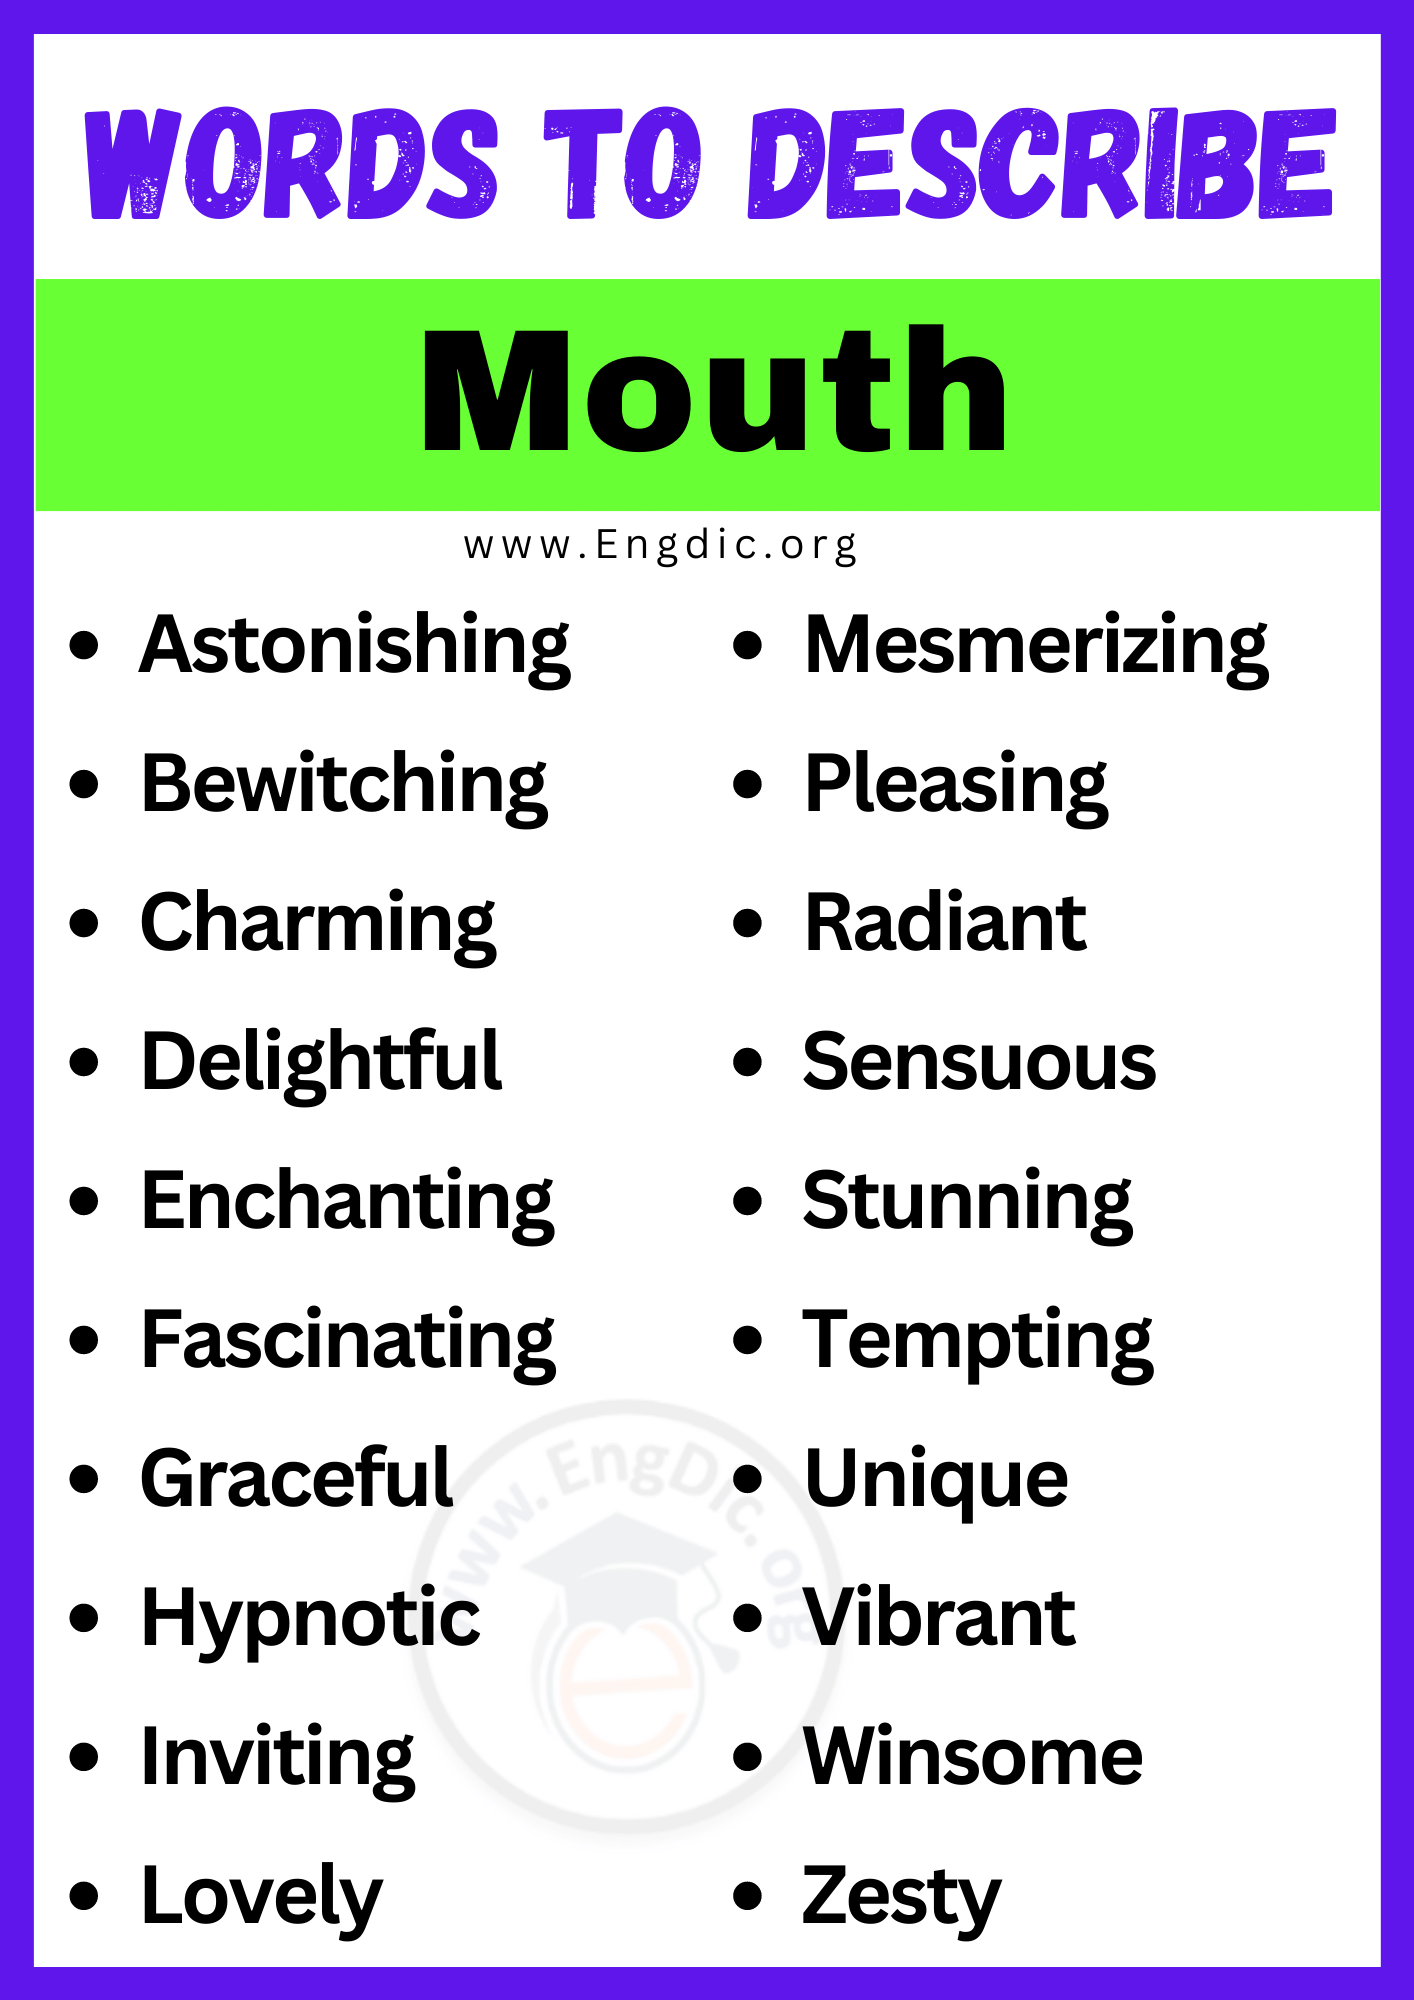 Words to Describe Mouth